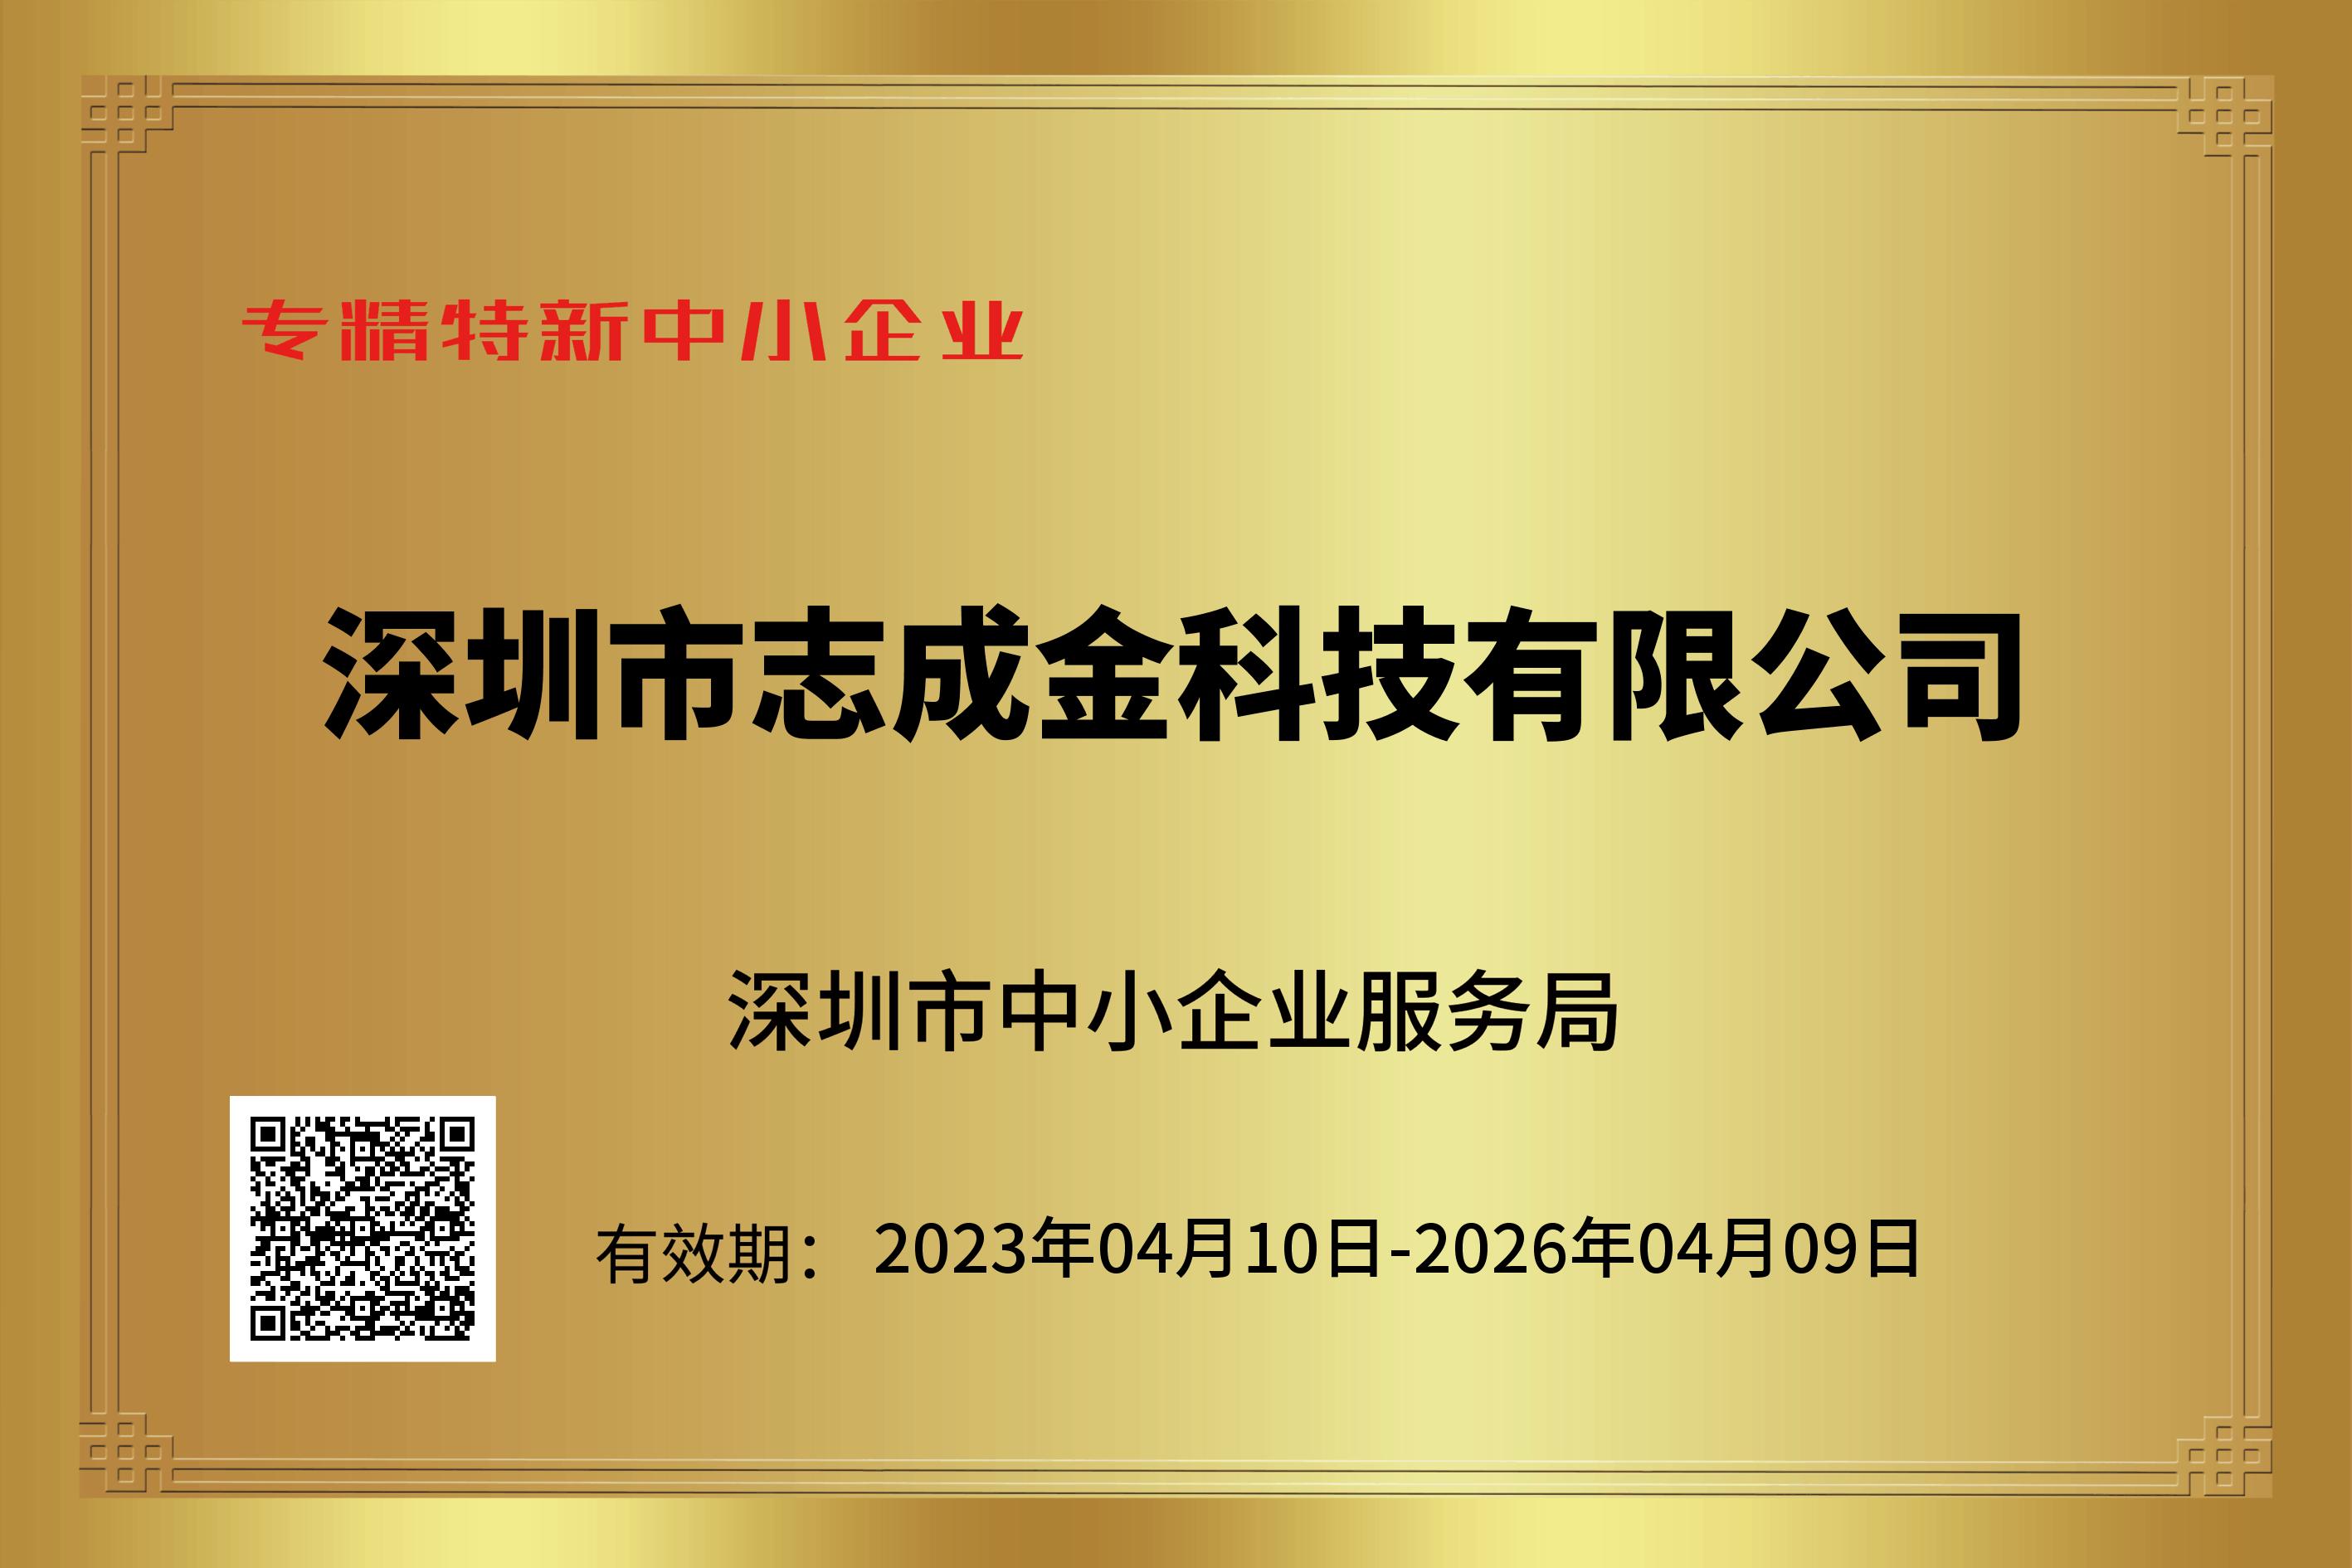 Awarded as the 2022 Shenzhen Specialized, Refined, and New Enterprise